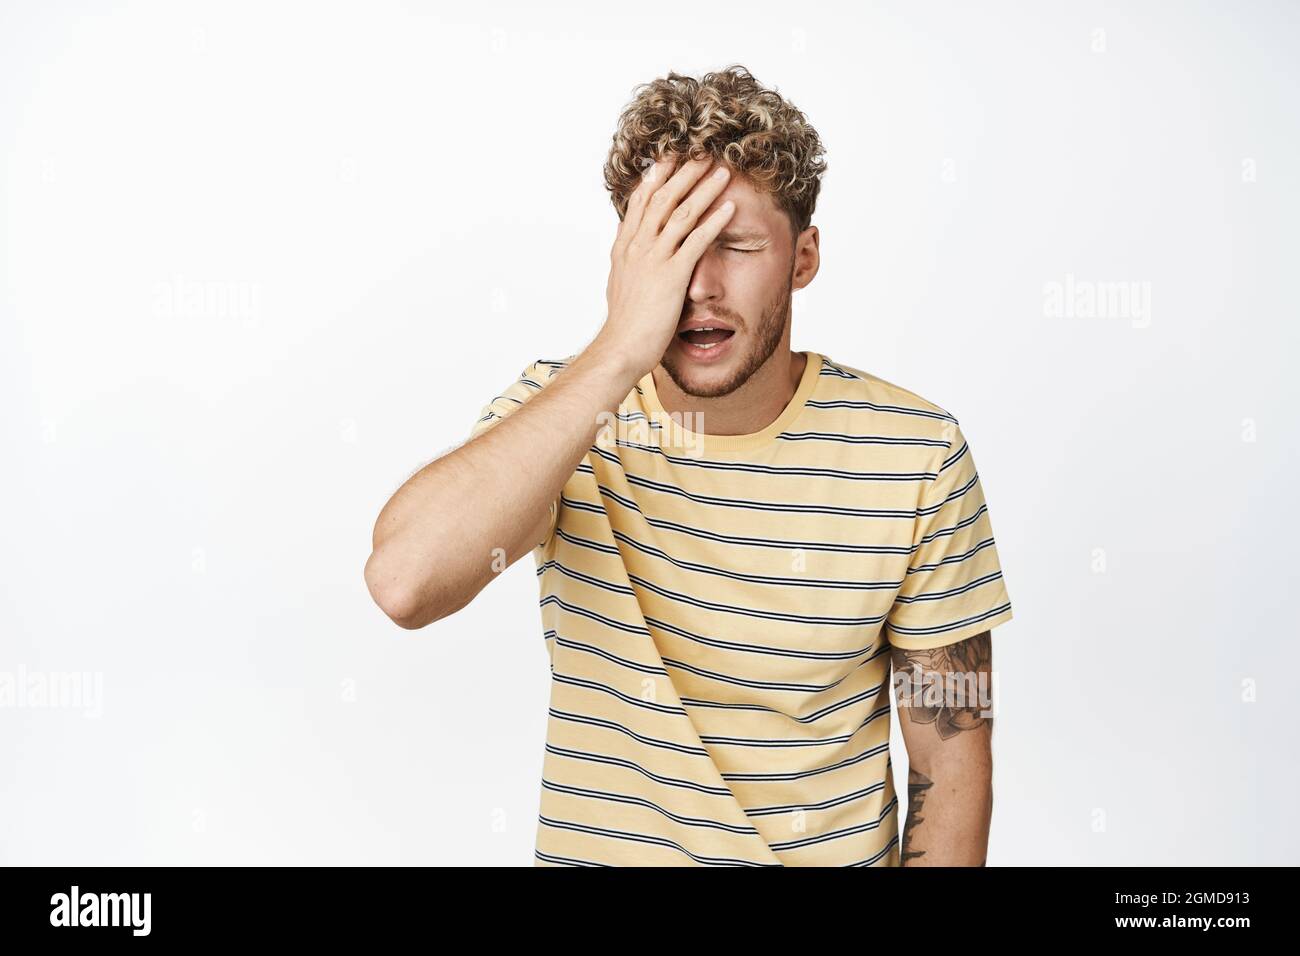 Shocked distressed blond man making facepalm, standing frustrated and upset, crying and sobbing, standing in casual clothes over white background Stock Photo